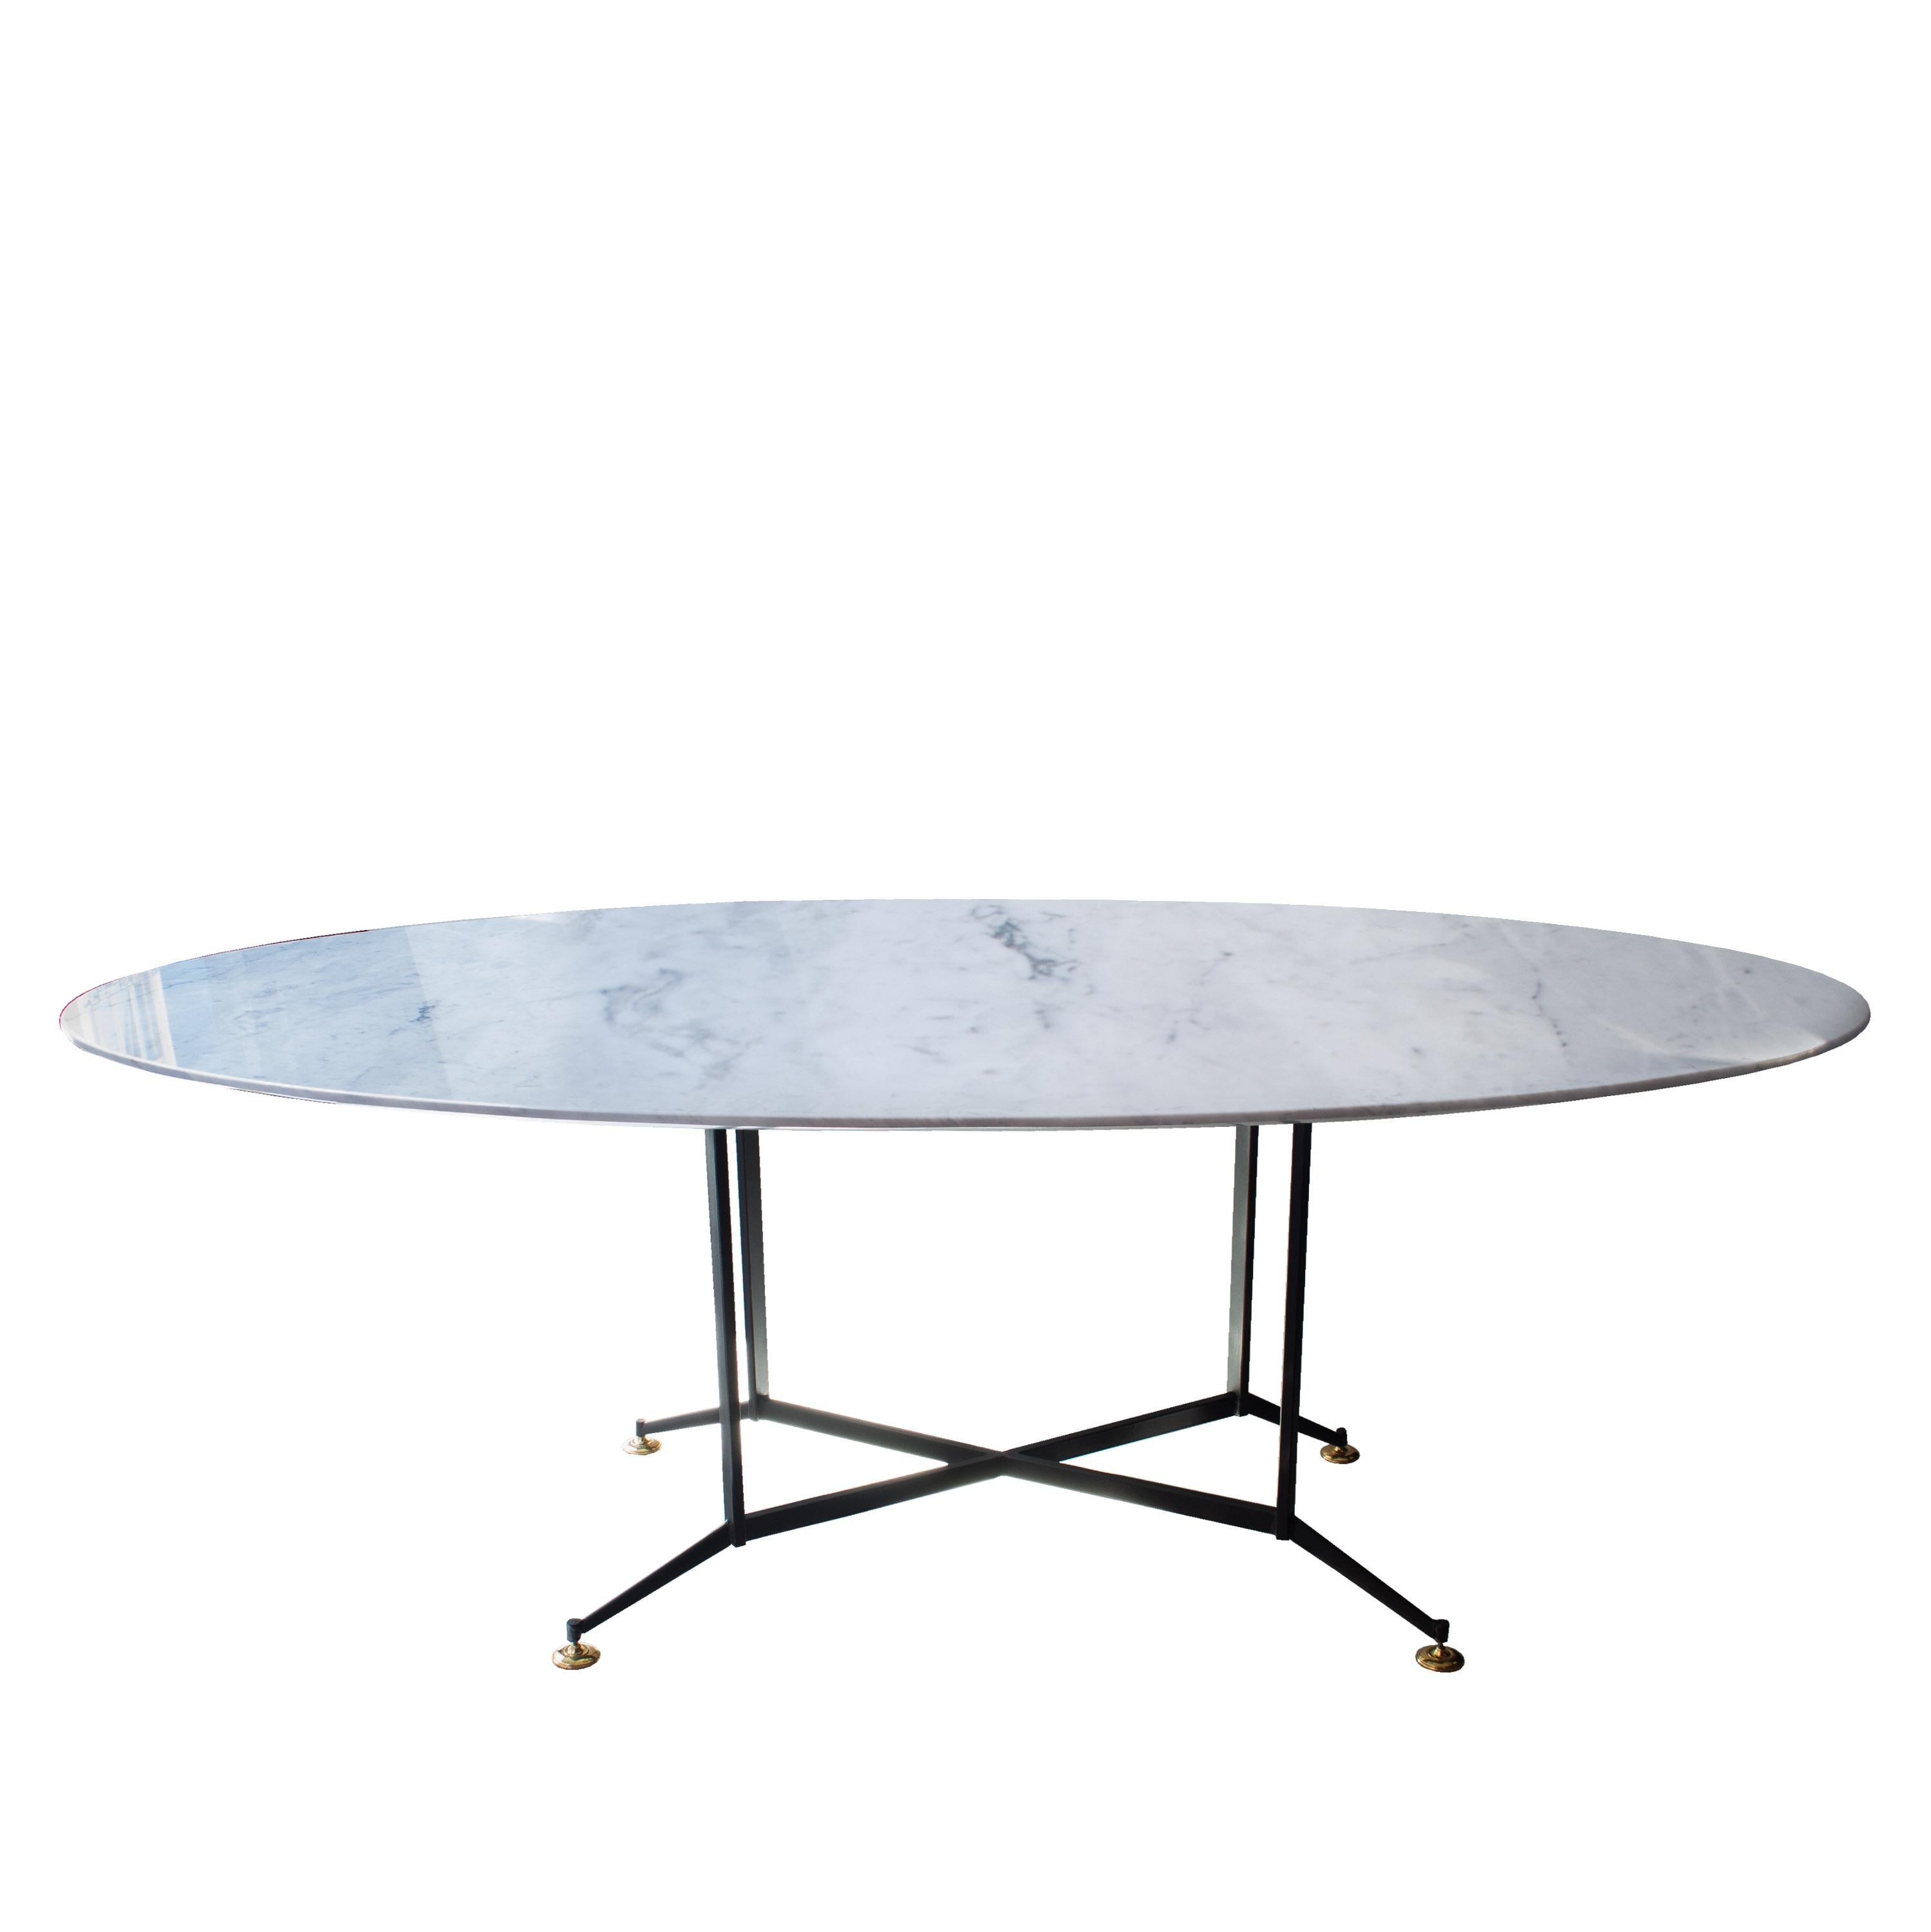 Dining table made up of black lacquered iron structure, with height adjustable brass finished legs; and oval Carrara marble top.